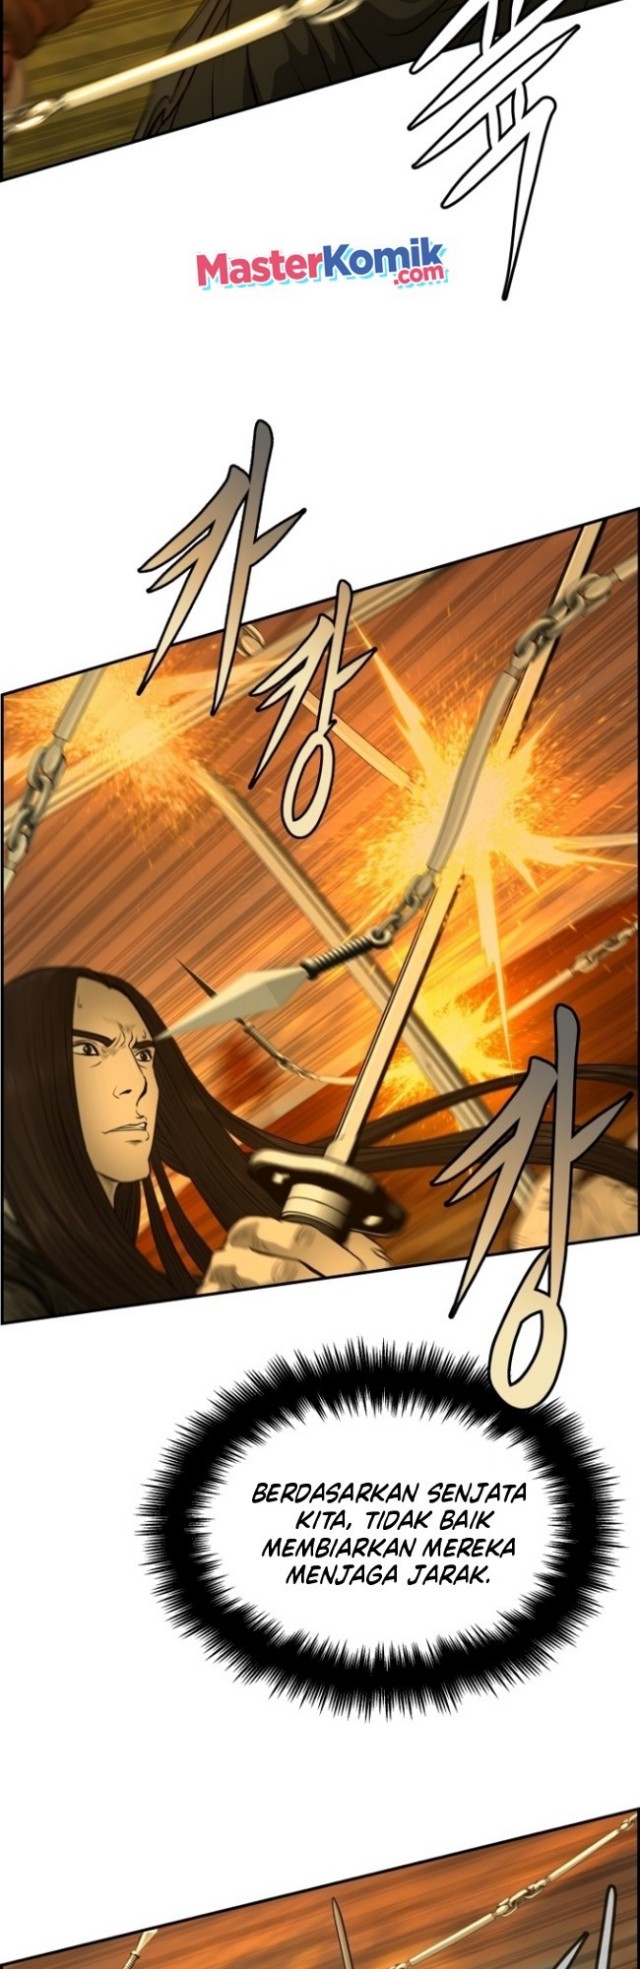 Blade Of Winds And Thunders Chapter 27